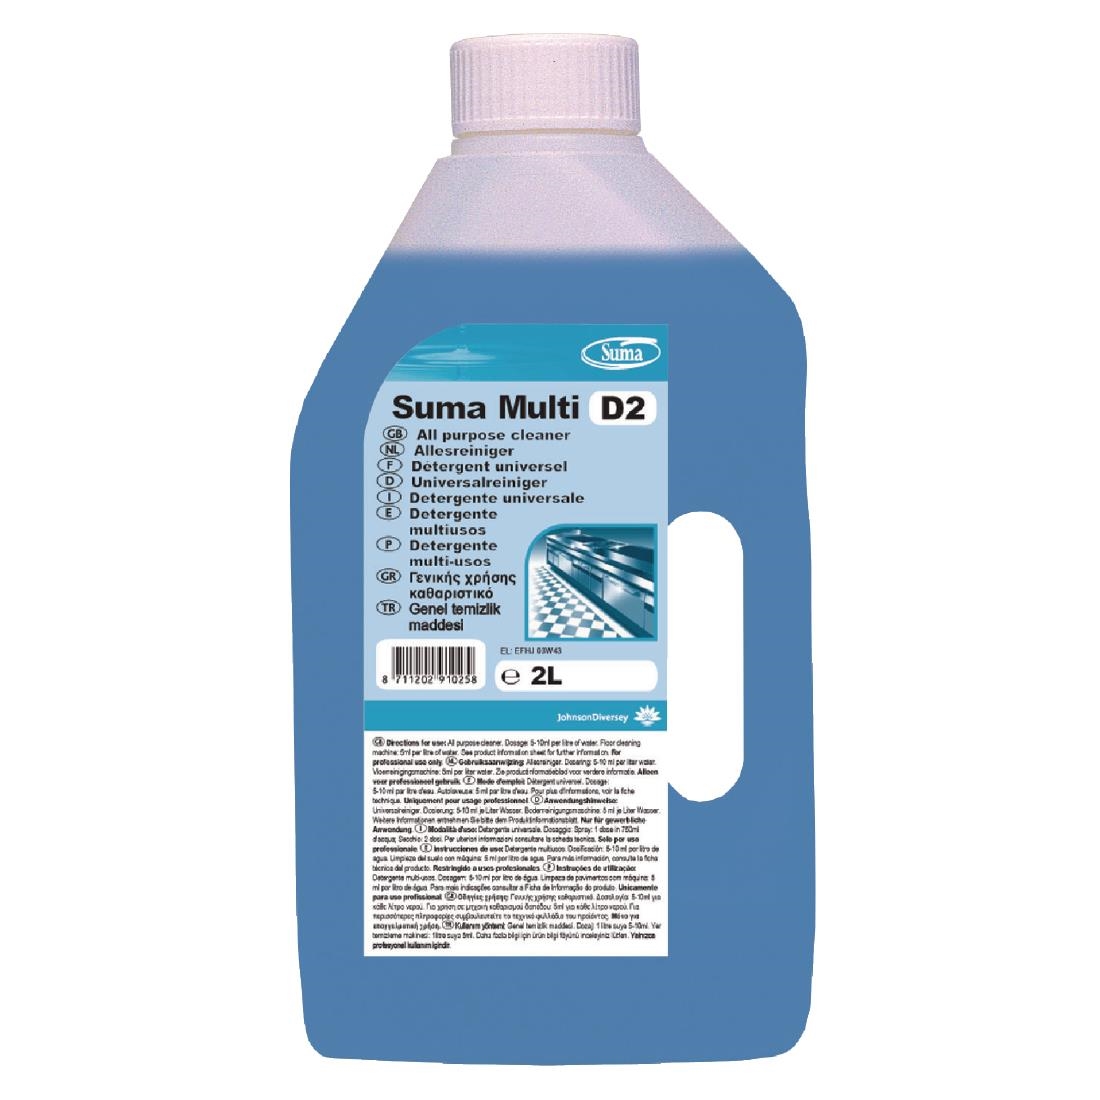 Suma Multi D2 All-Purpose Cleaner Concentrate 2Ltr (6 Pack)